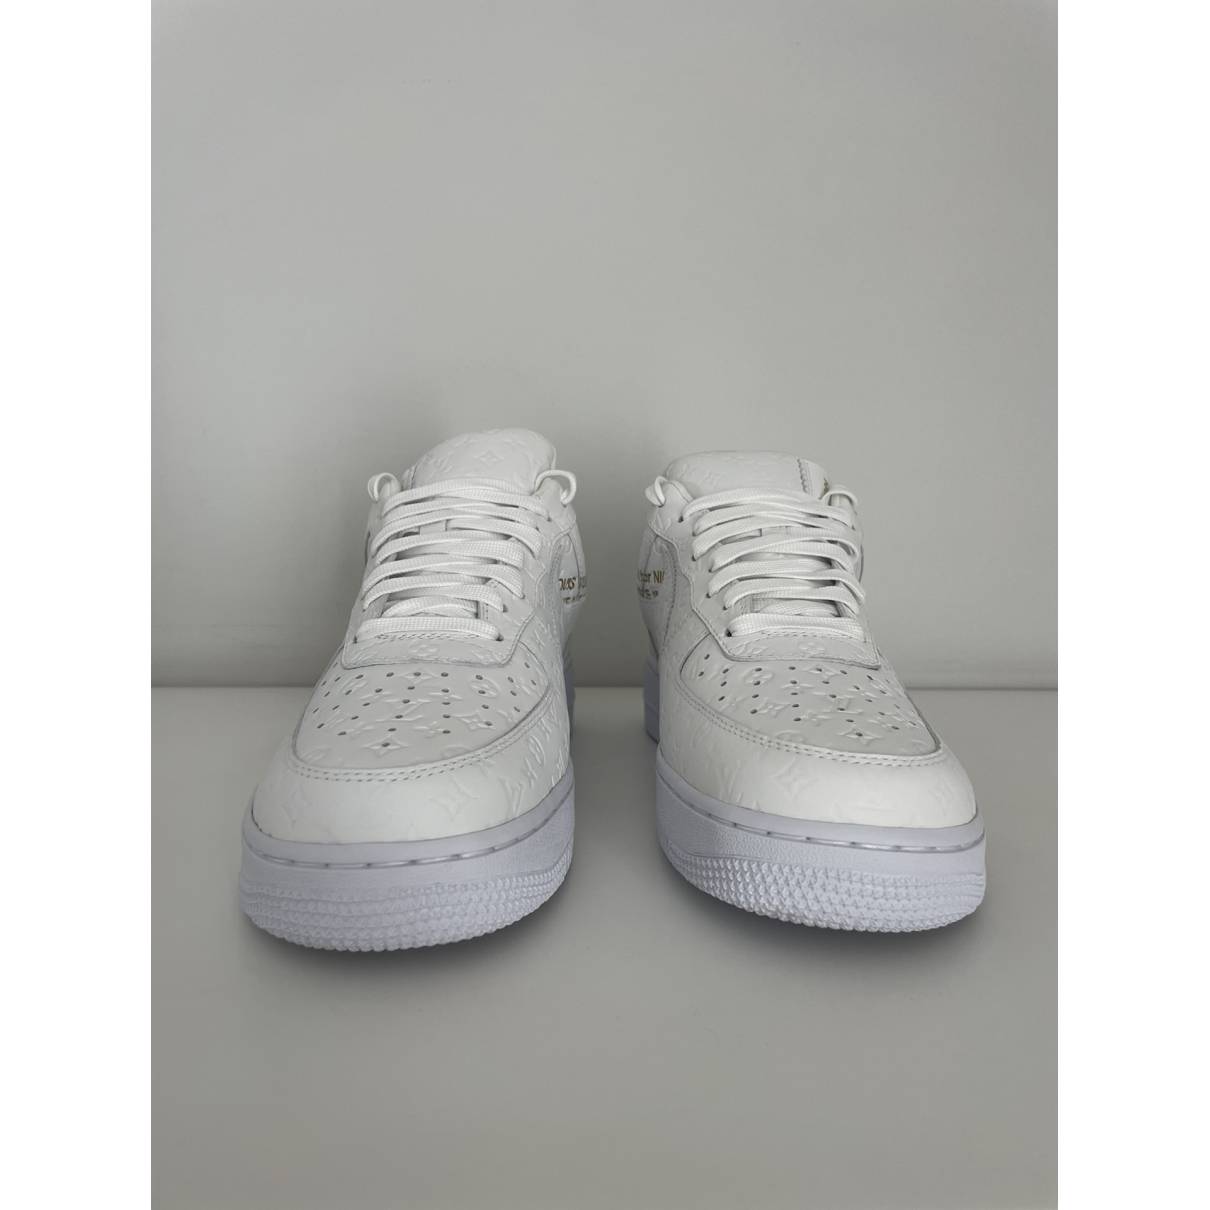 Leather high trainers Louis Vuitton X Nike White size 8.5 US in